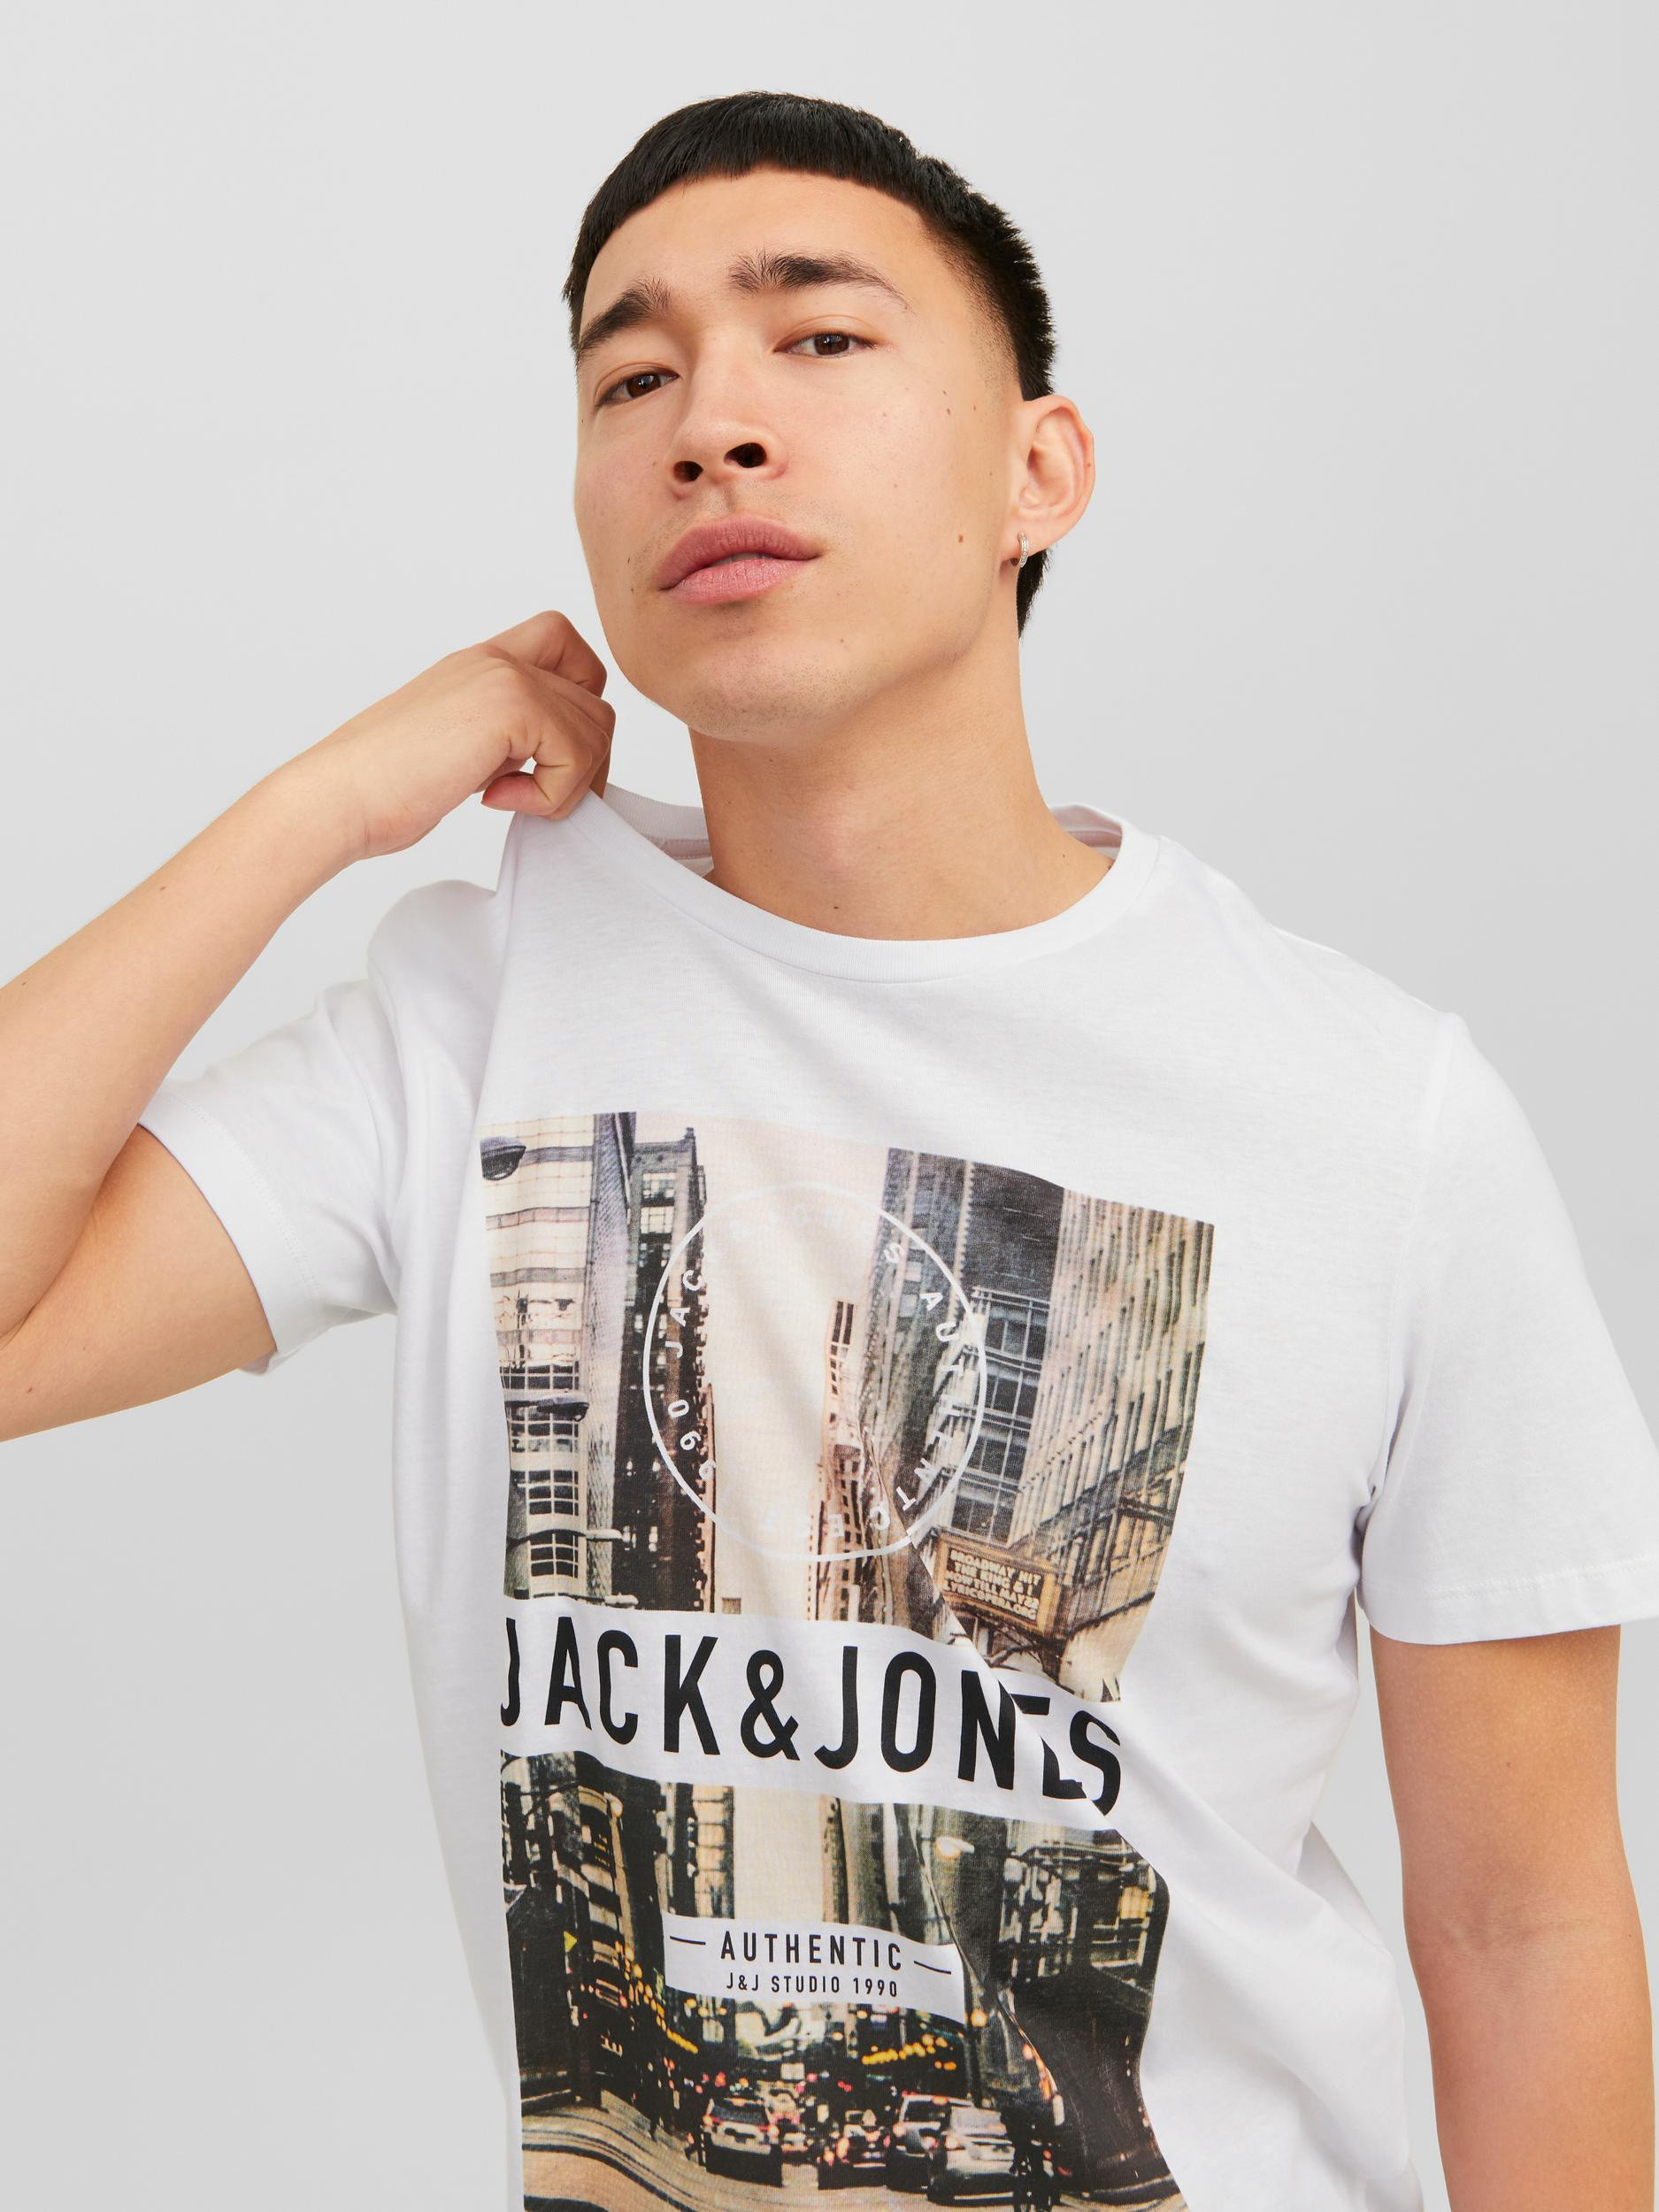 Jack & Jones -Cotton T-shirt with print, White, large image number 4